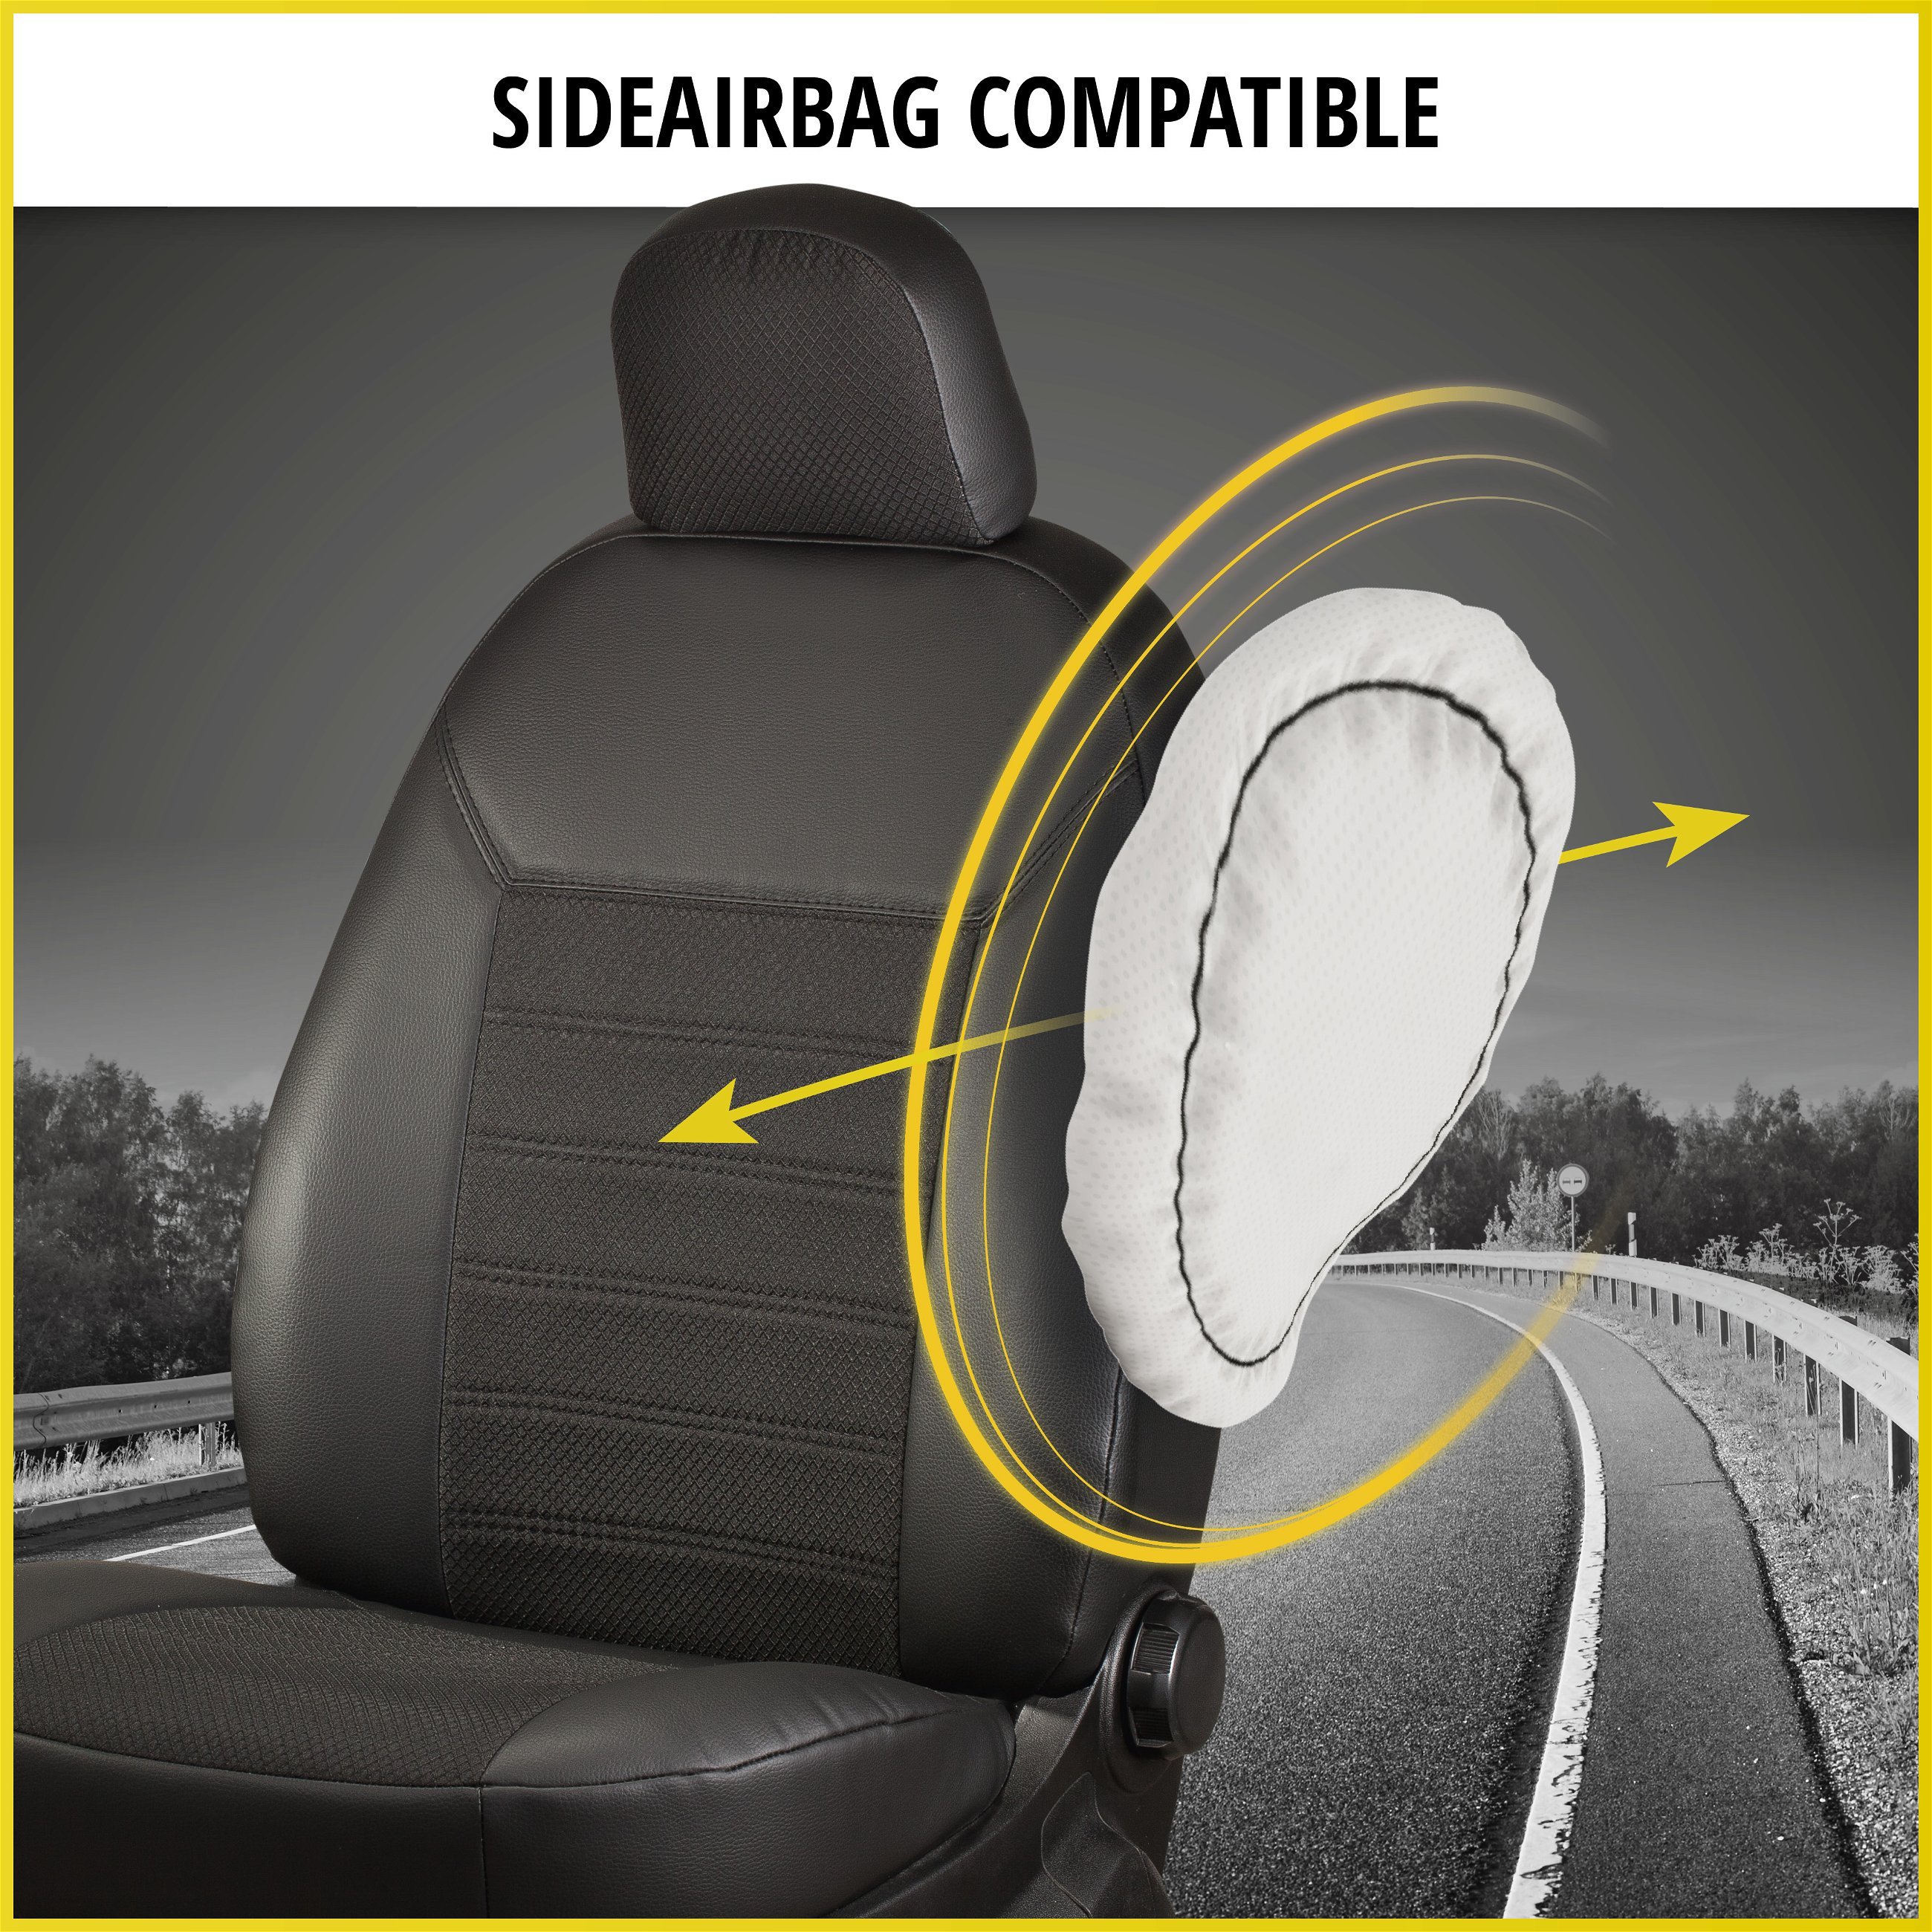 Premium Seat Cover for Fiat Ducato 07/2006-Today, 1 single seat cover front + armrest cover, 1 double bench cover